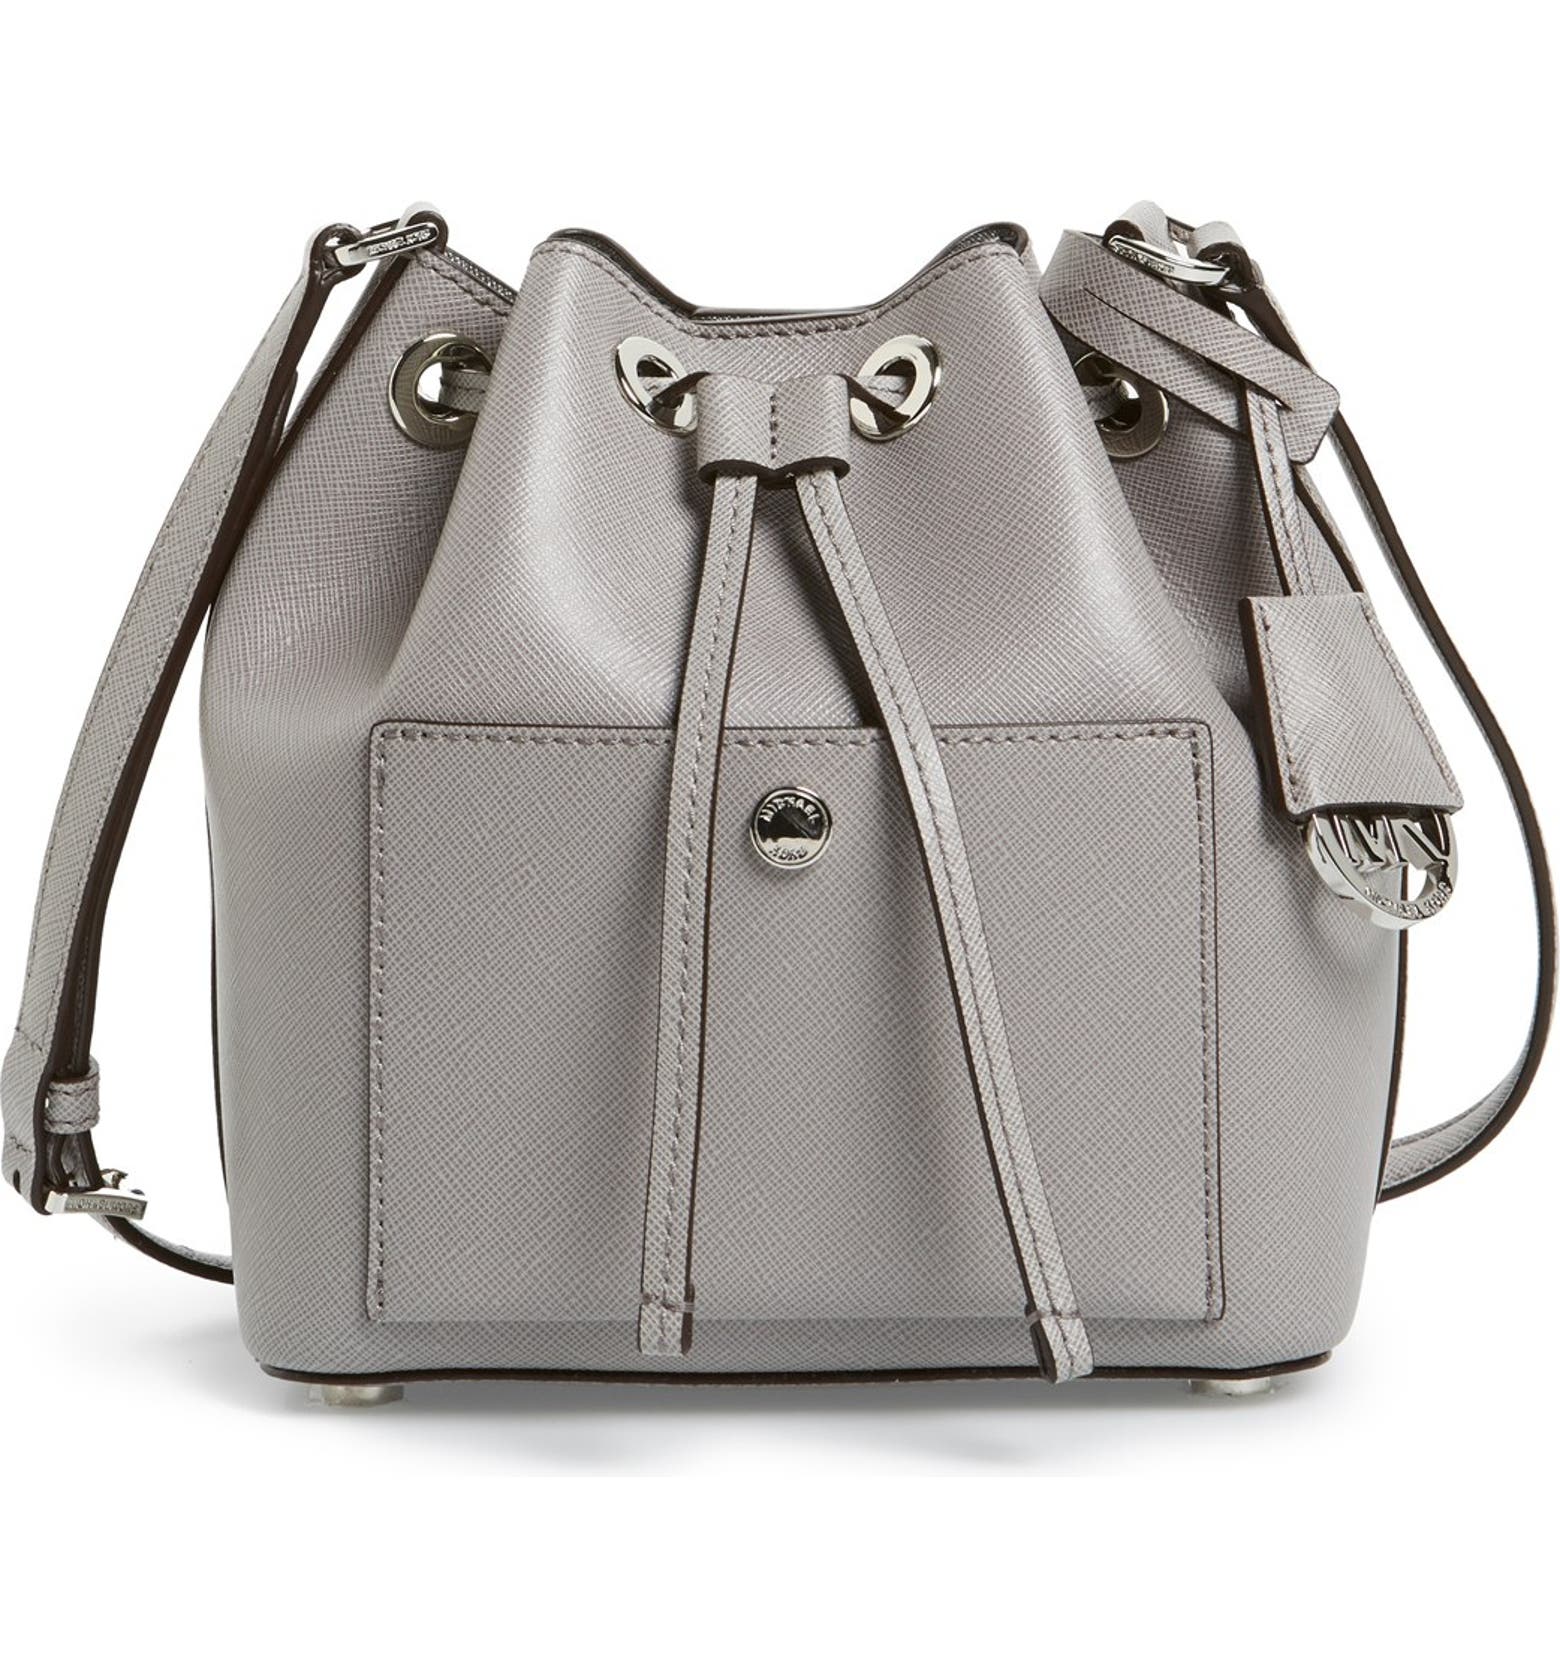 MICHAEL Michael Kors 'Small Greenwich' Leather Bucket Bag | Nordstrom